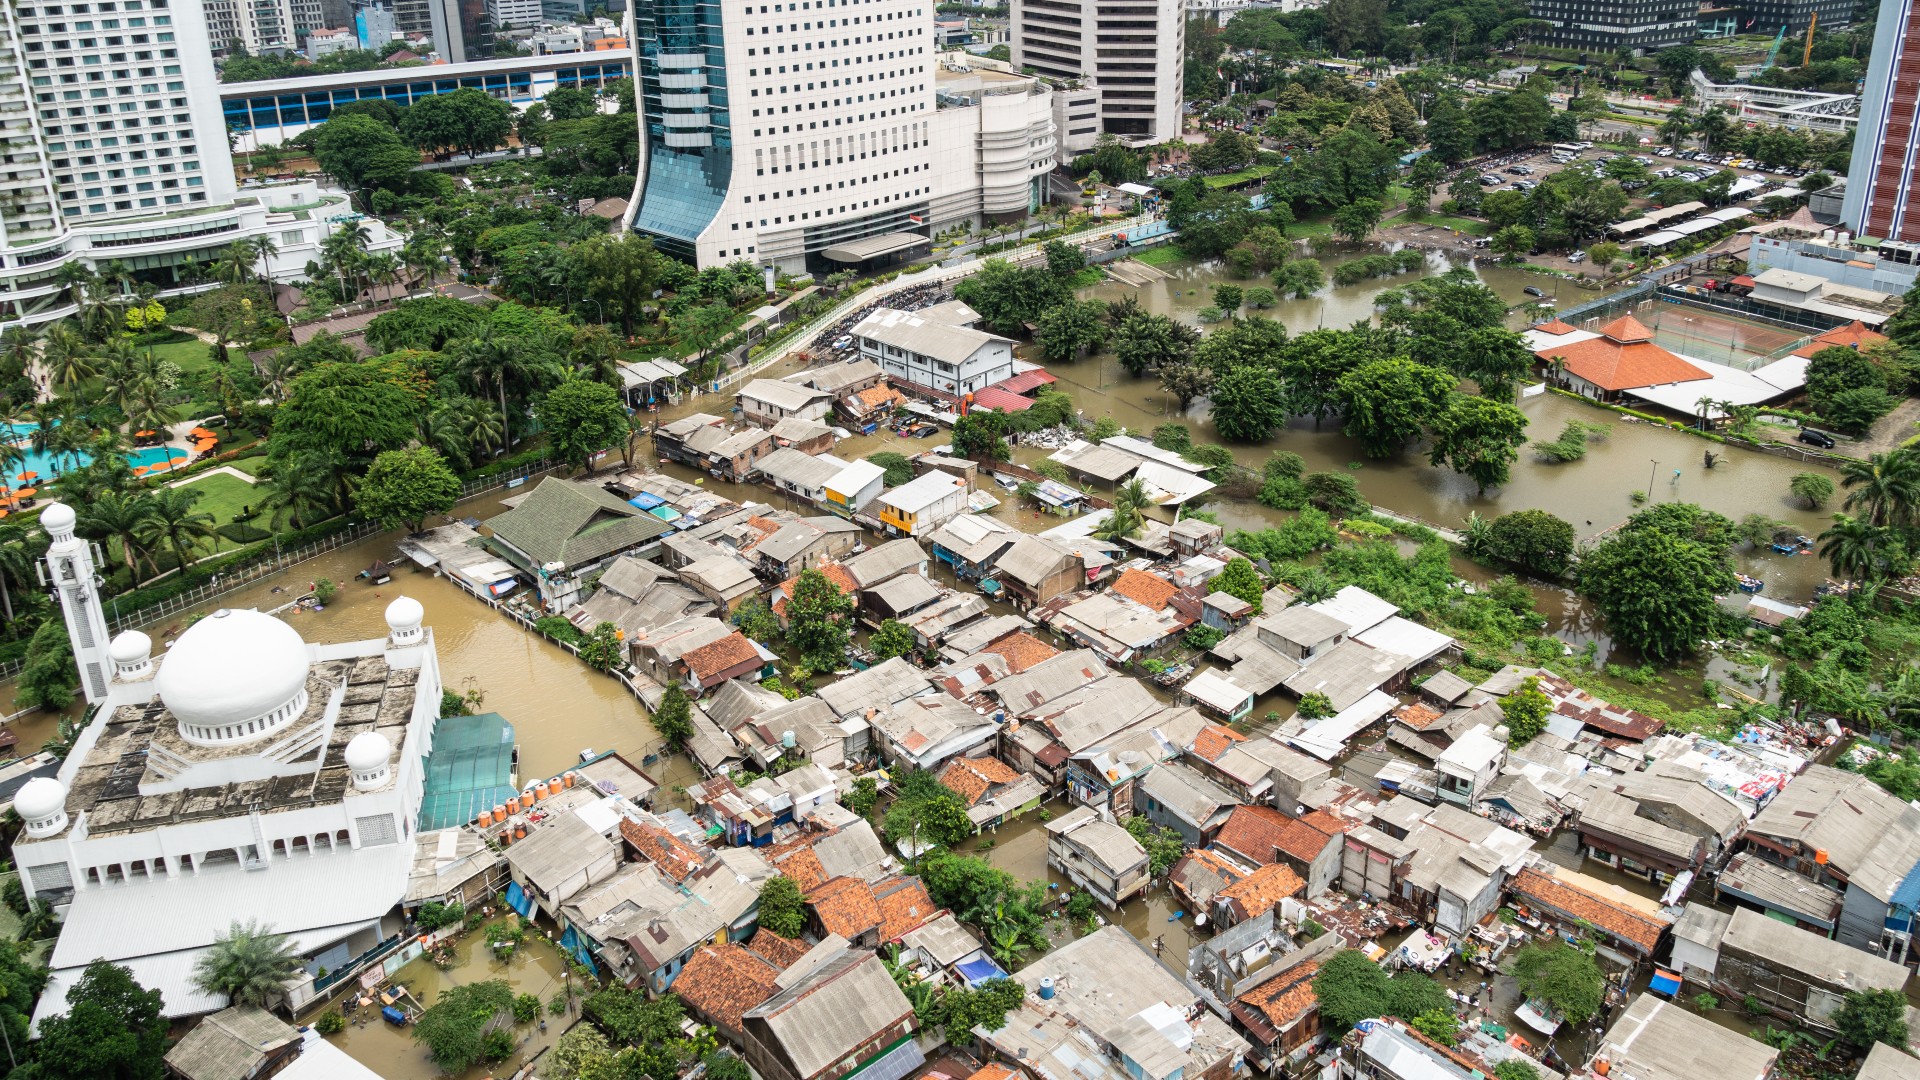 A flooded street in a poor residential district in the heart of Jakarta city in Indonesia. AsianDream via Getty Images